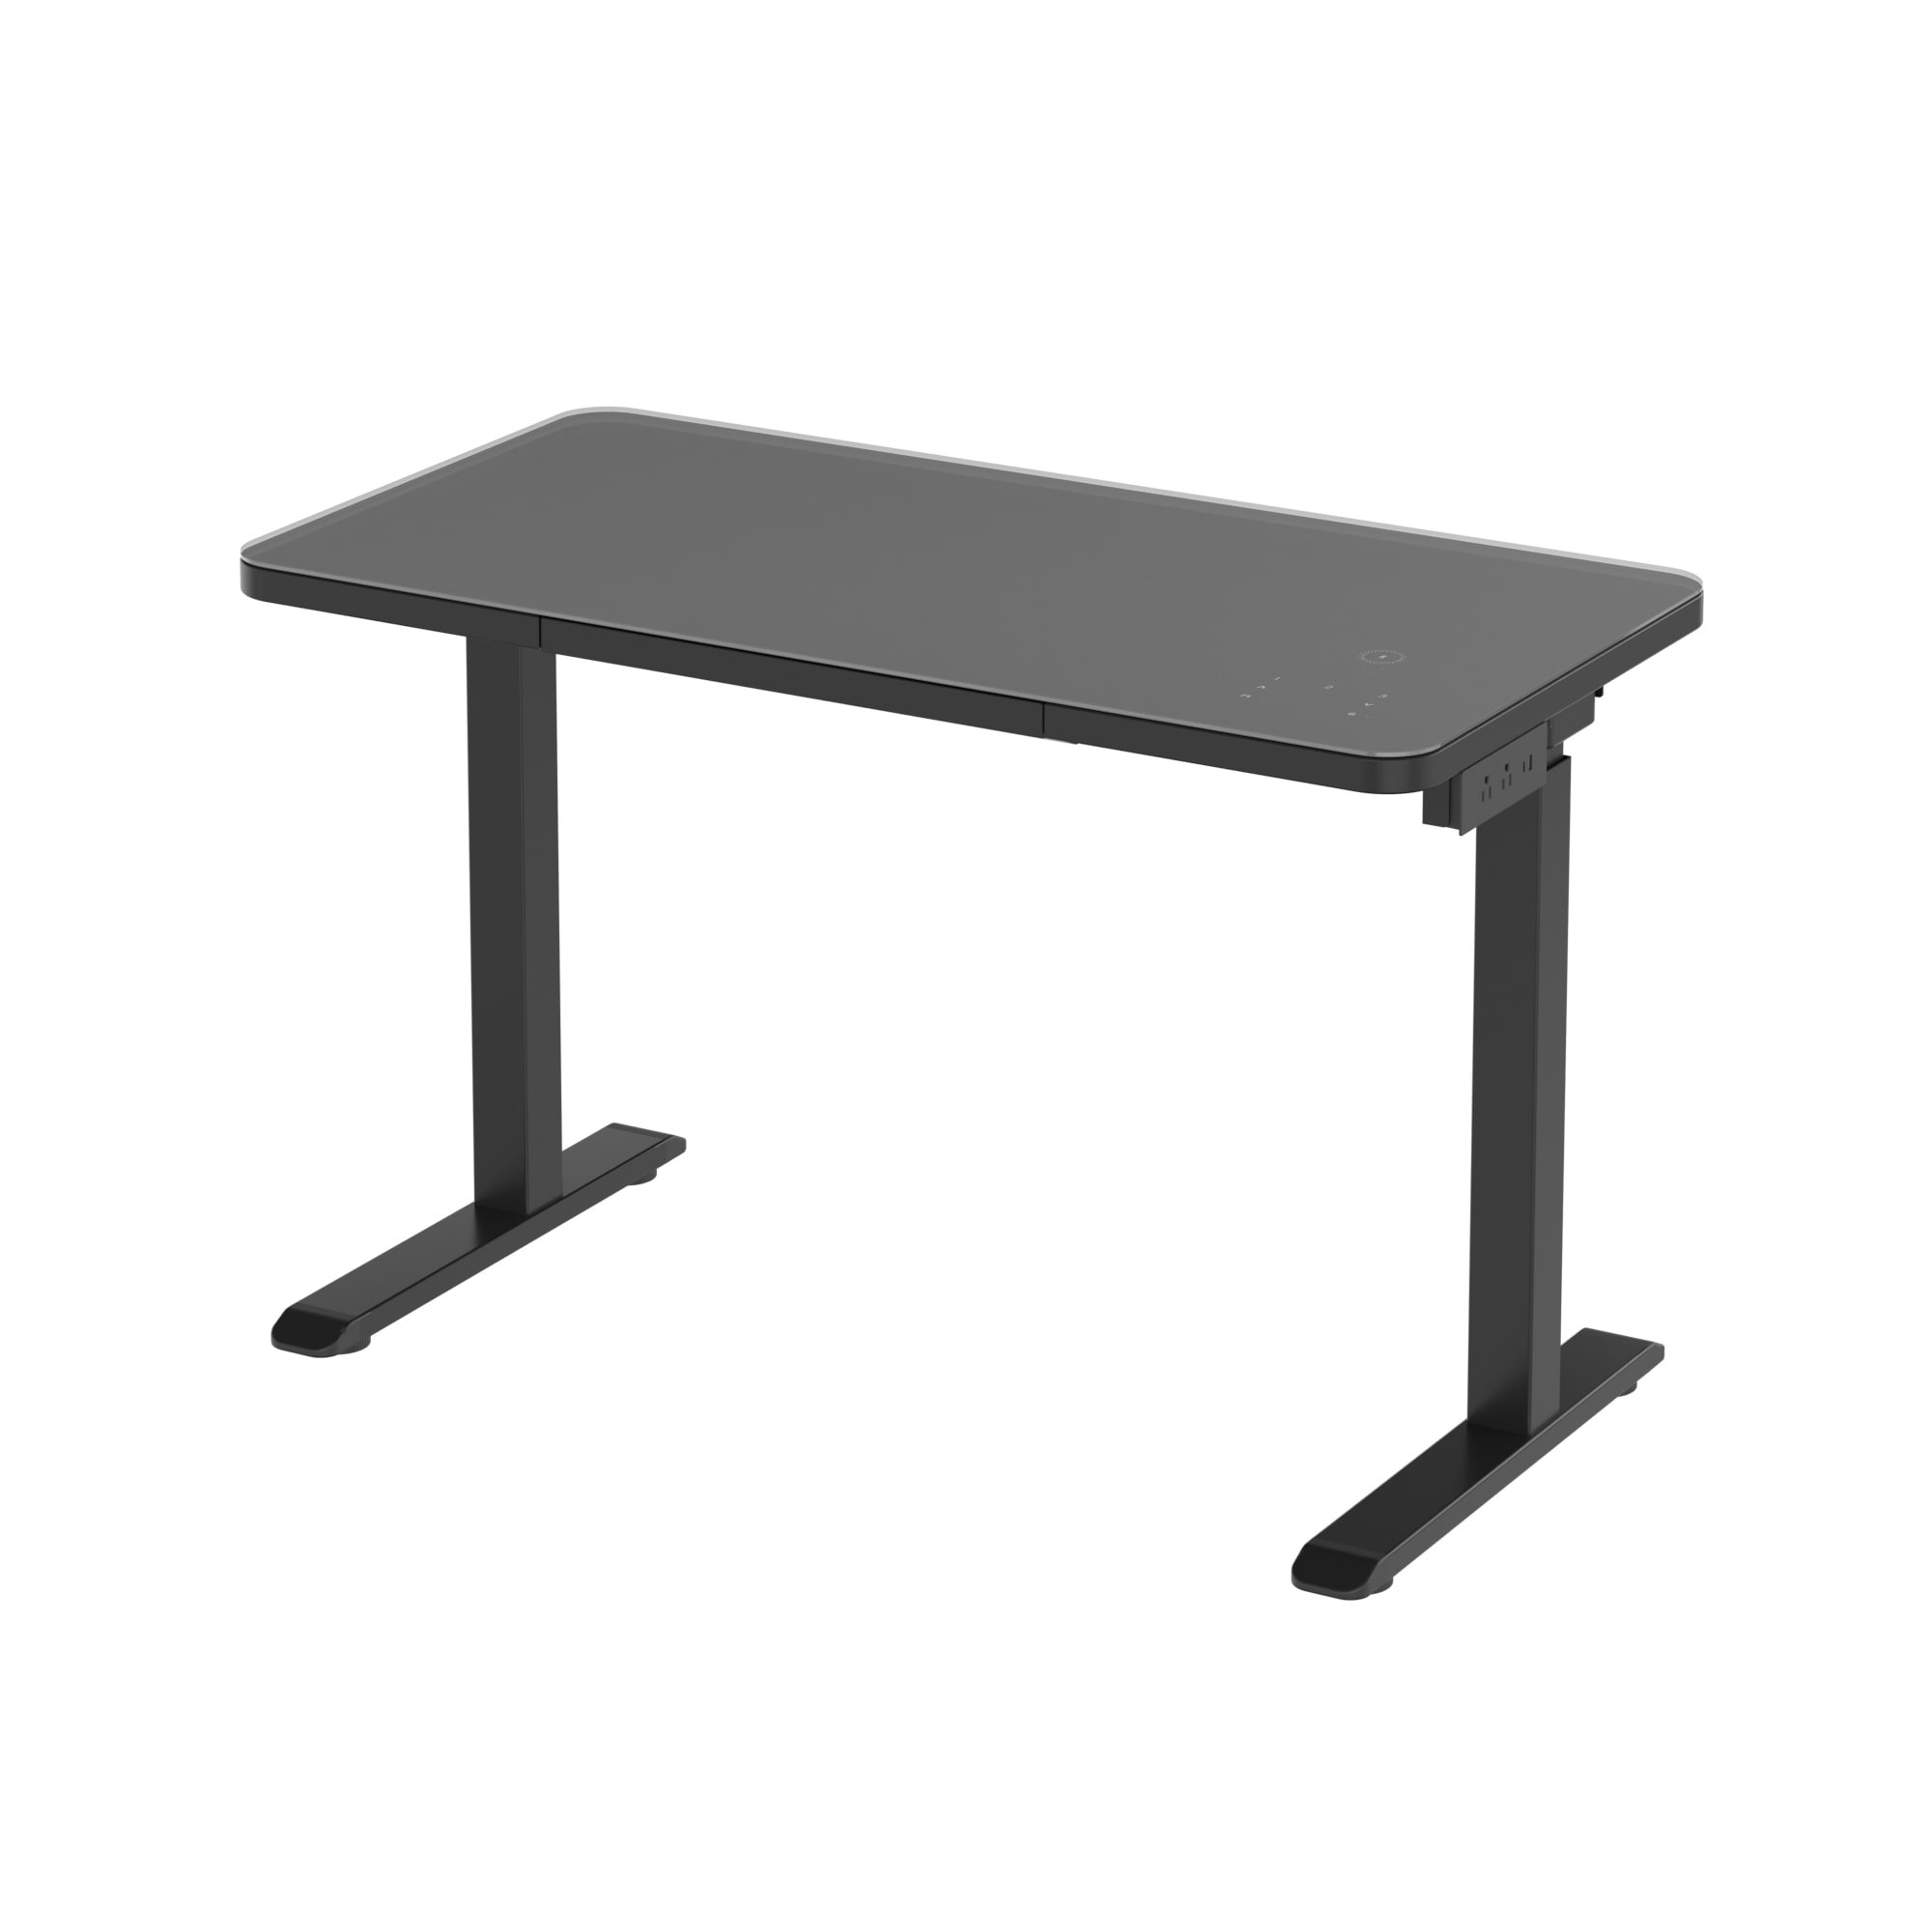 https://ak1.ostkcdn.com/images/products/is/images/direct/4944186a8033ad4a2c66a704a0a83579e1558f93/Small-Computer-Desk-Study-Table-for-Small-Spaces-Home-Office-Student-Laptop-PC-Writing-Desks-Office-Desk-with-Keyboard-Tray.jpg